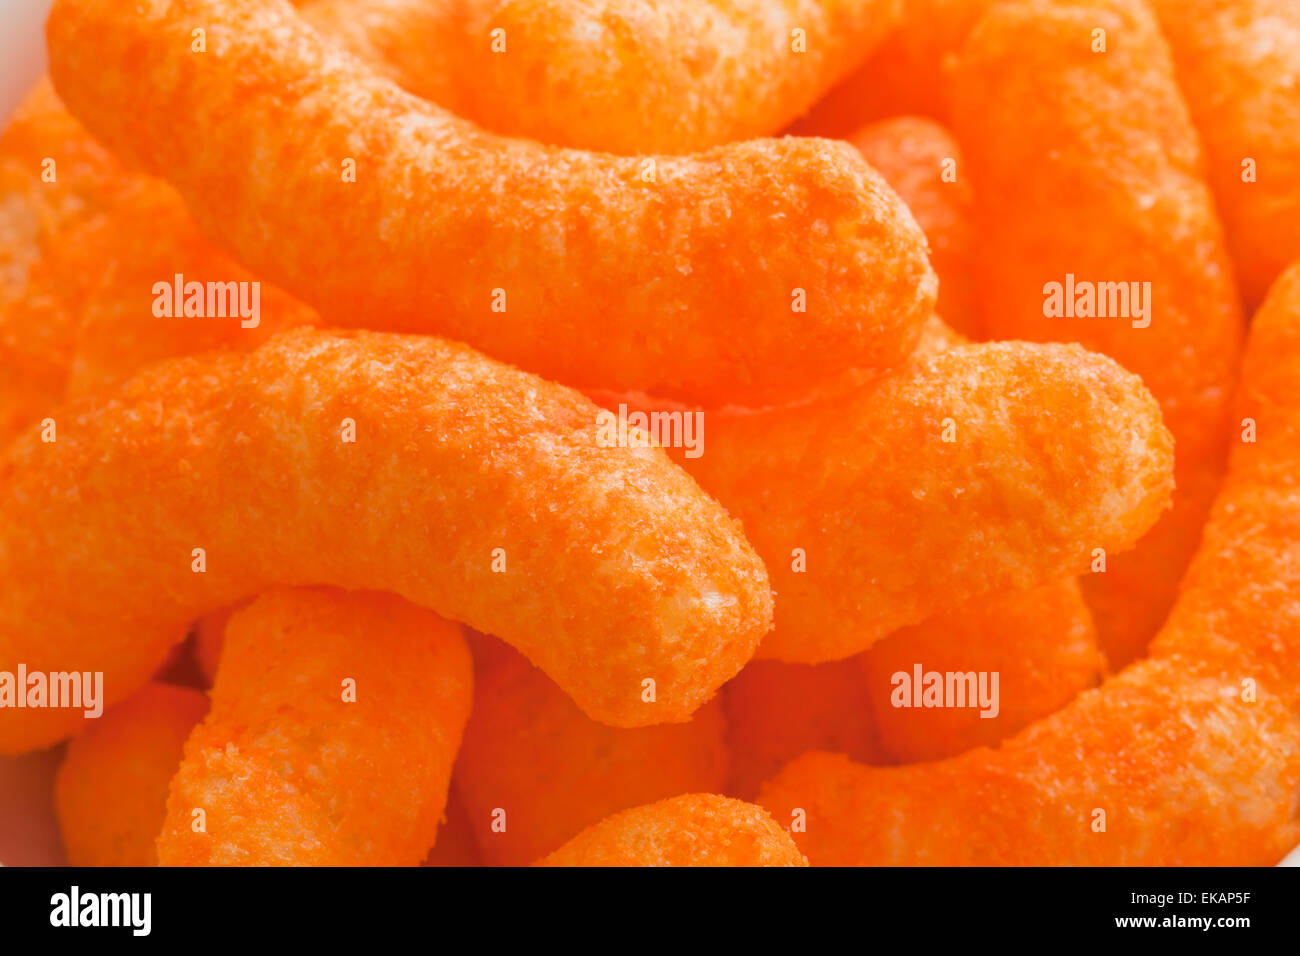 Cheese Puff Balls, Cheese Flavoured Puffs or Balls Over Moody Background  Stock Image - Image of calories, crusty: 216301321